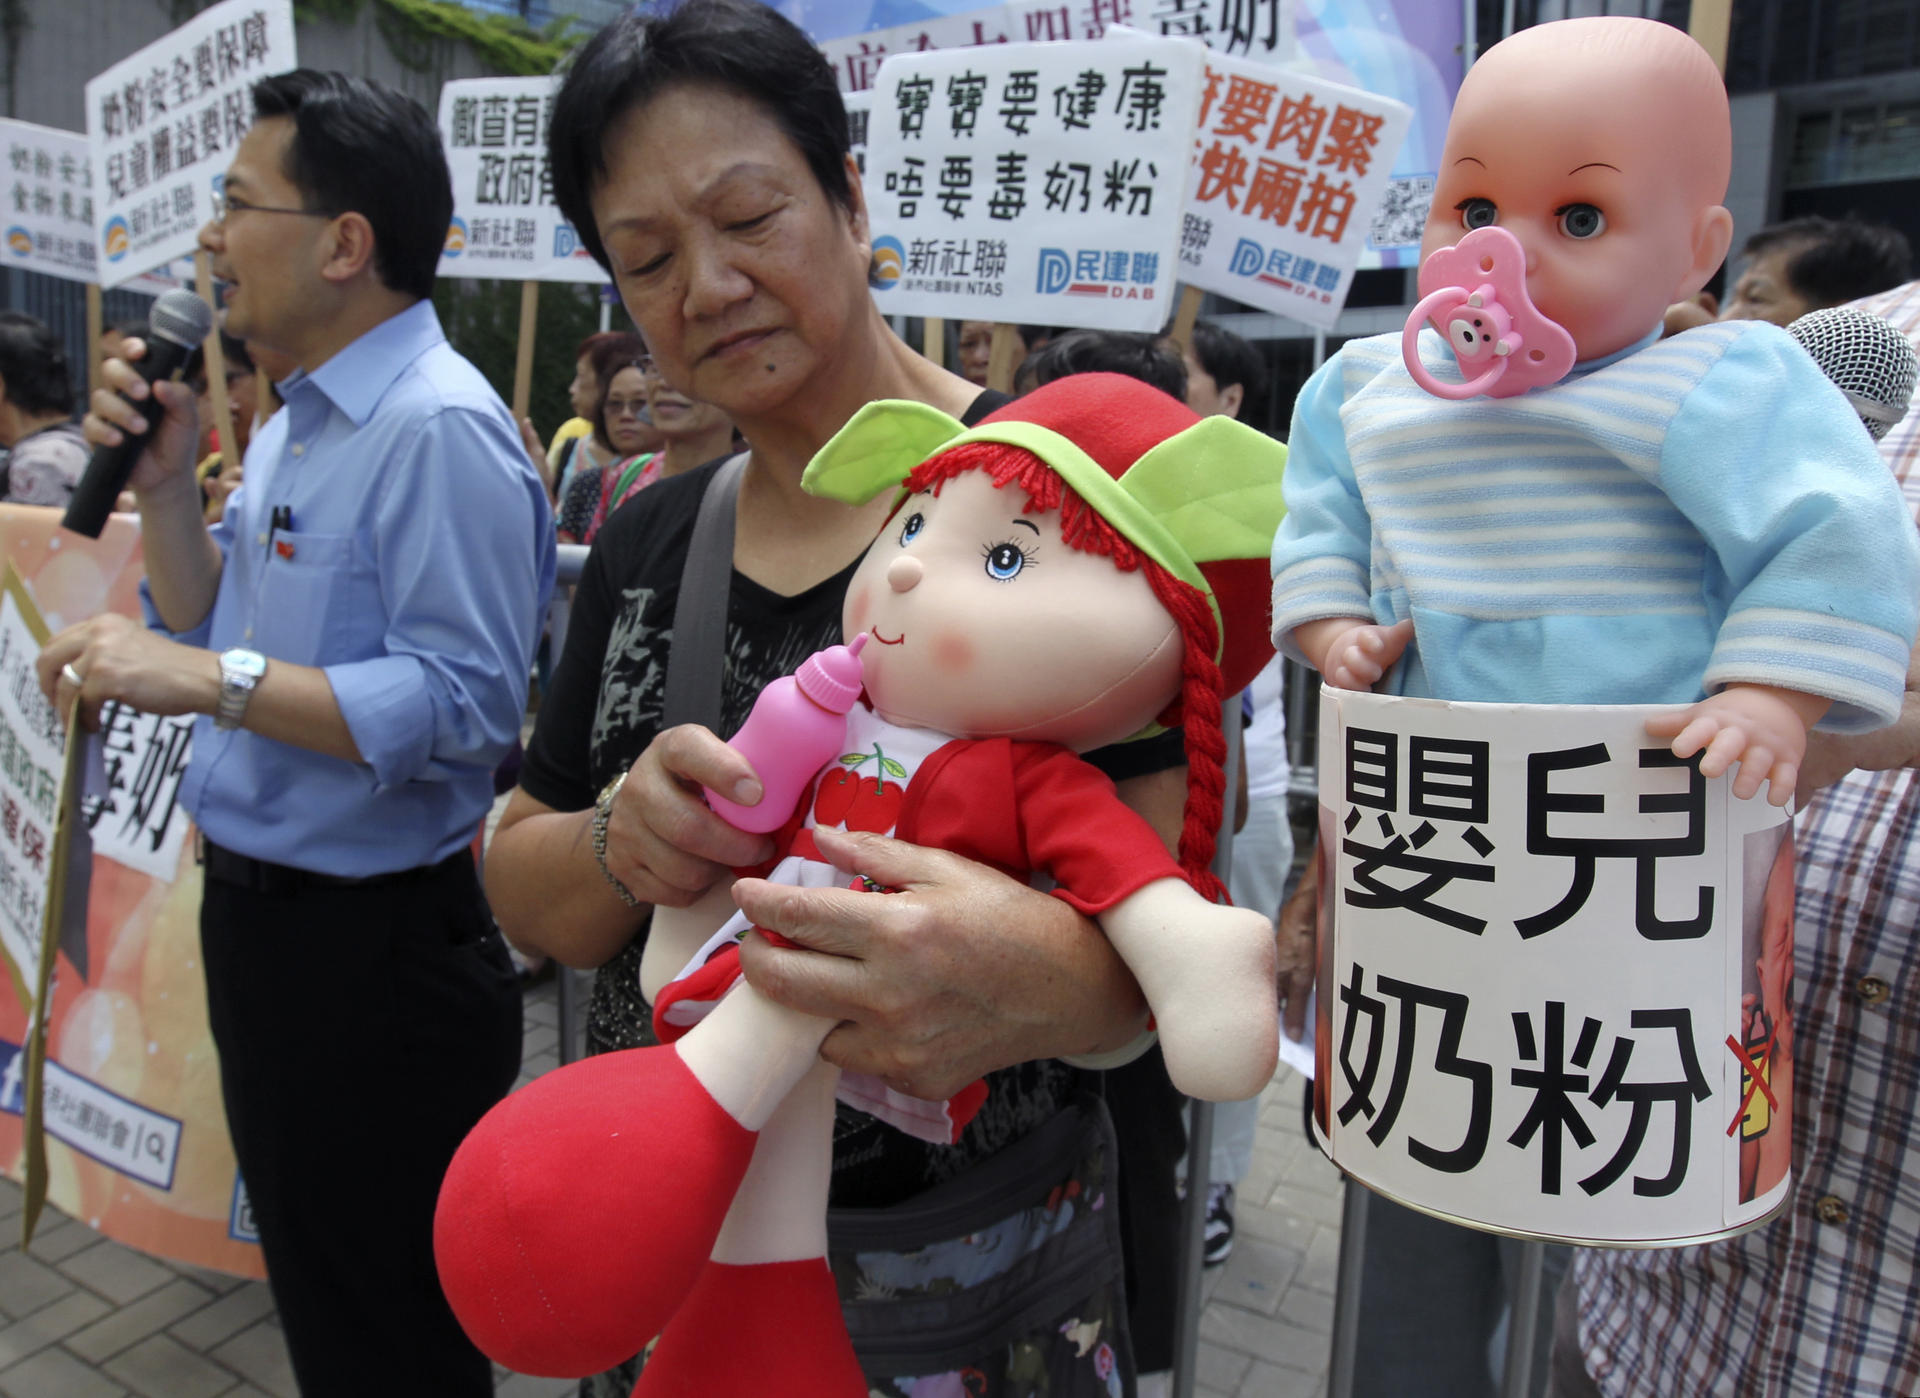 People protest over food safety concerns in baby formula at the central government offices in Admiralty yesterday. Photo: Dickson Lee